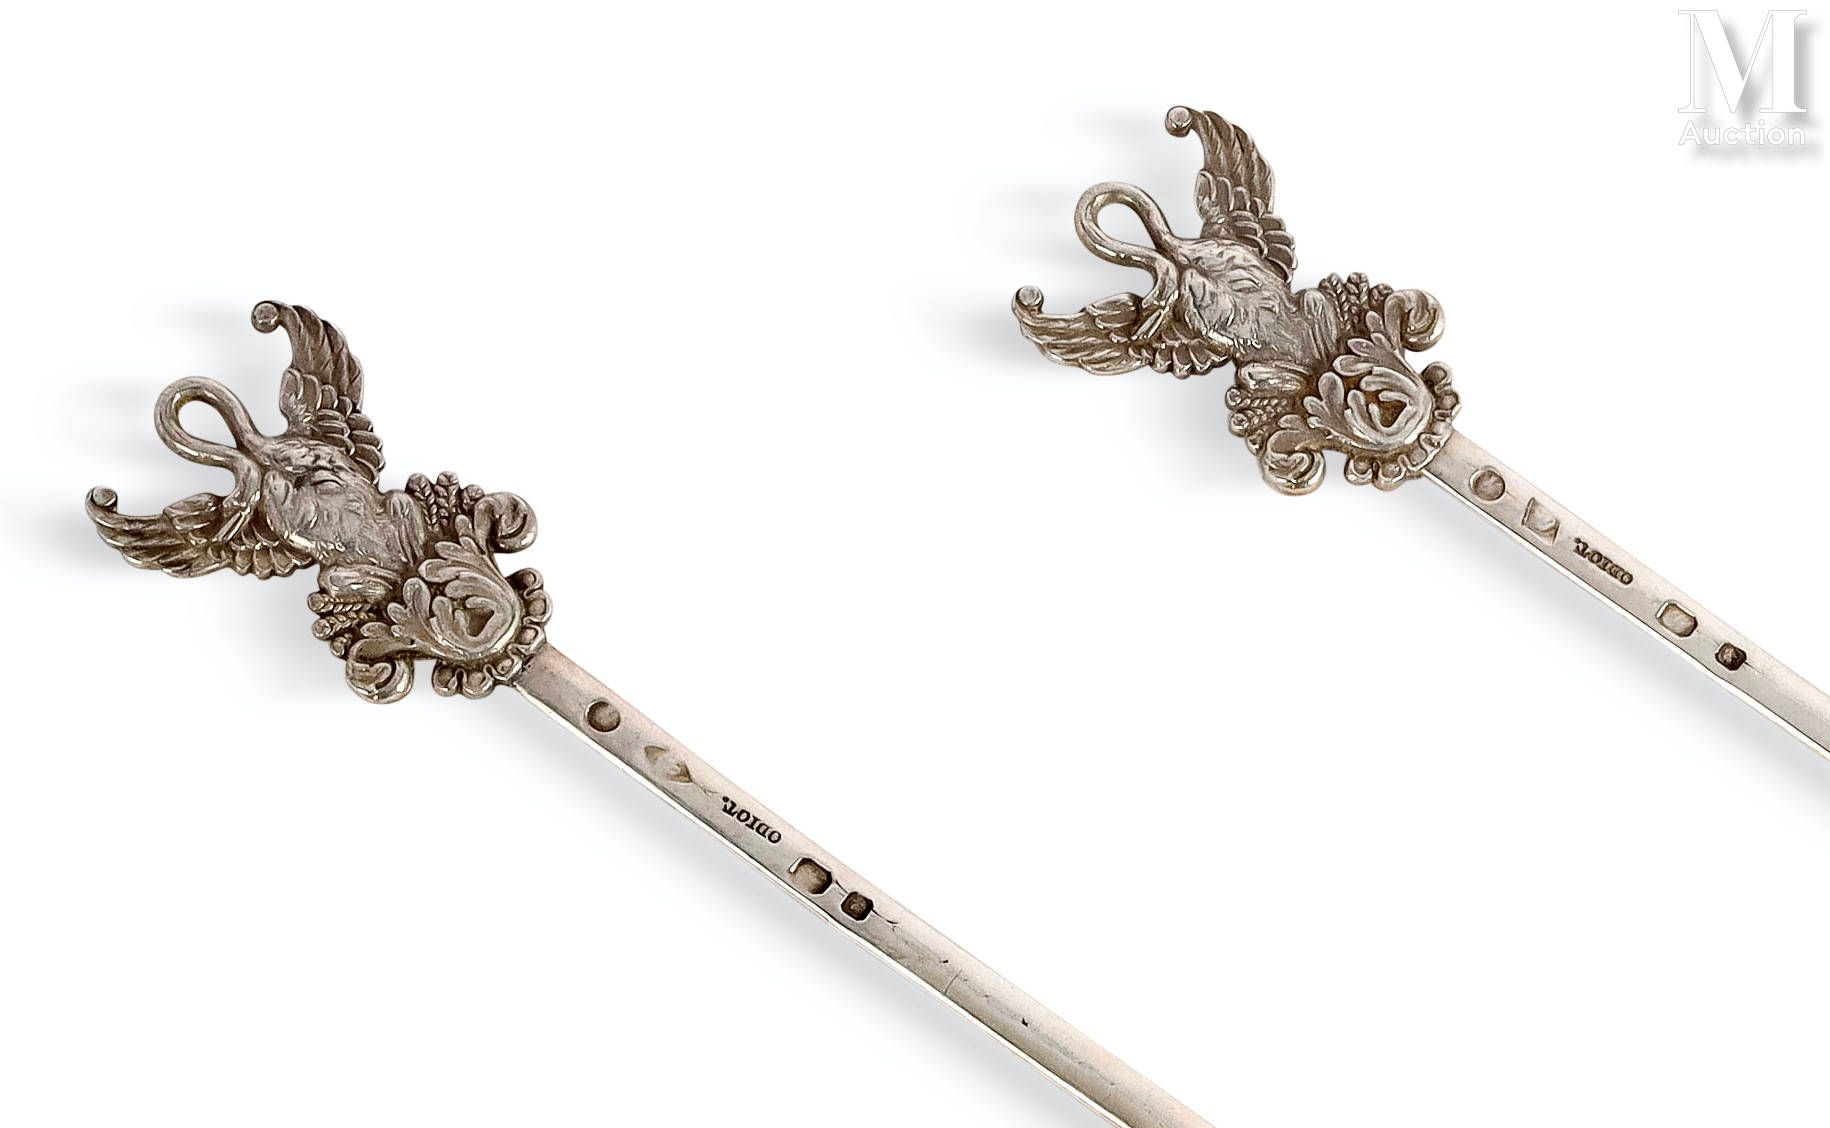 ODIOT Orfèvre à Paris Two silver skewers
in plain silver, decorated with swans a&hellip;